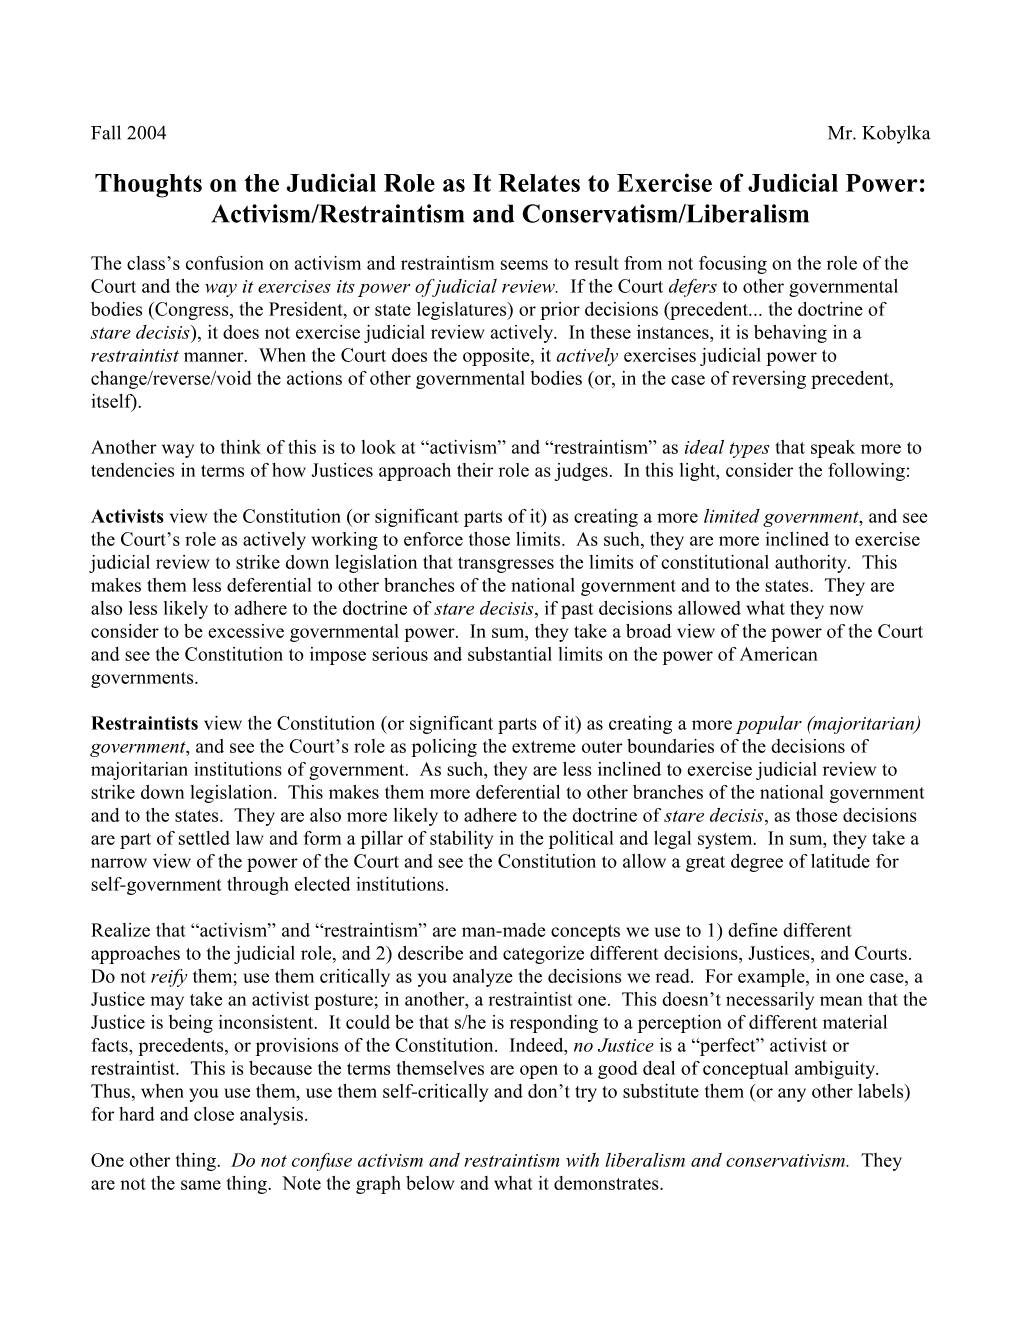 Thoughts on the Judicial Role As It Relates to Exercise of Judicial Power